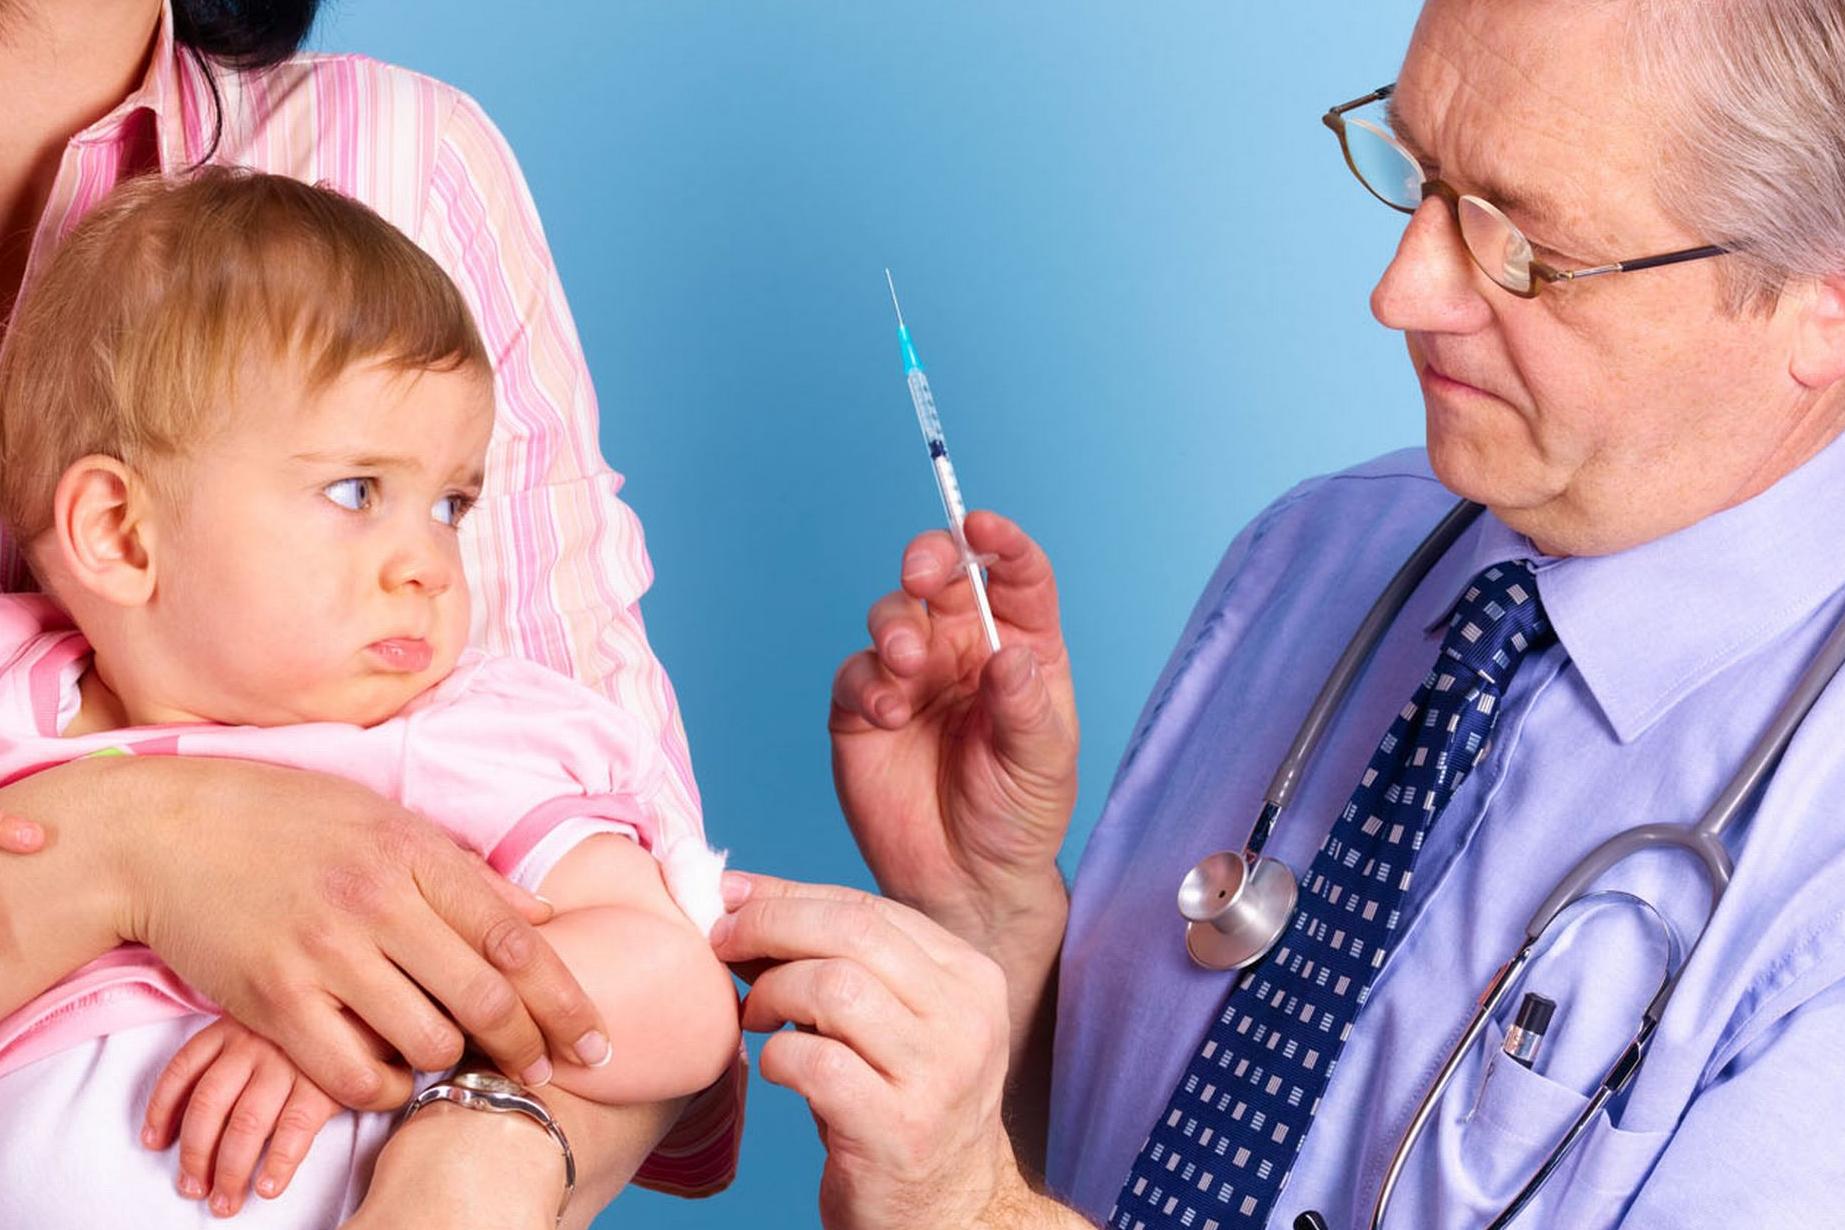 10 effective ways to ease the pain of vaccination